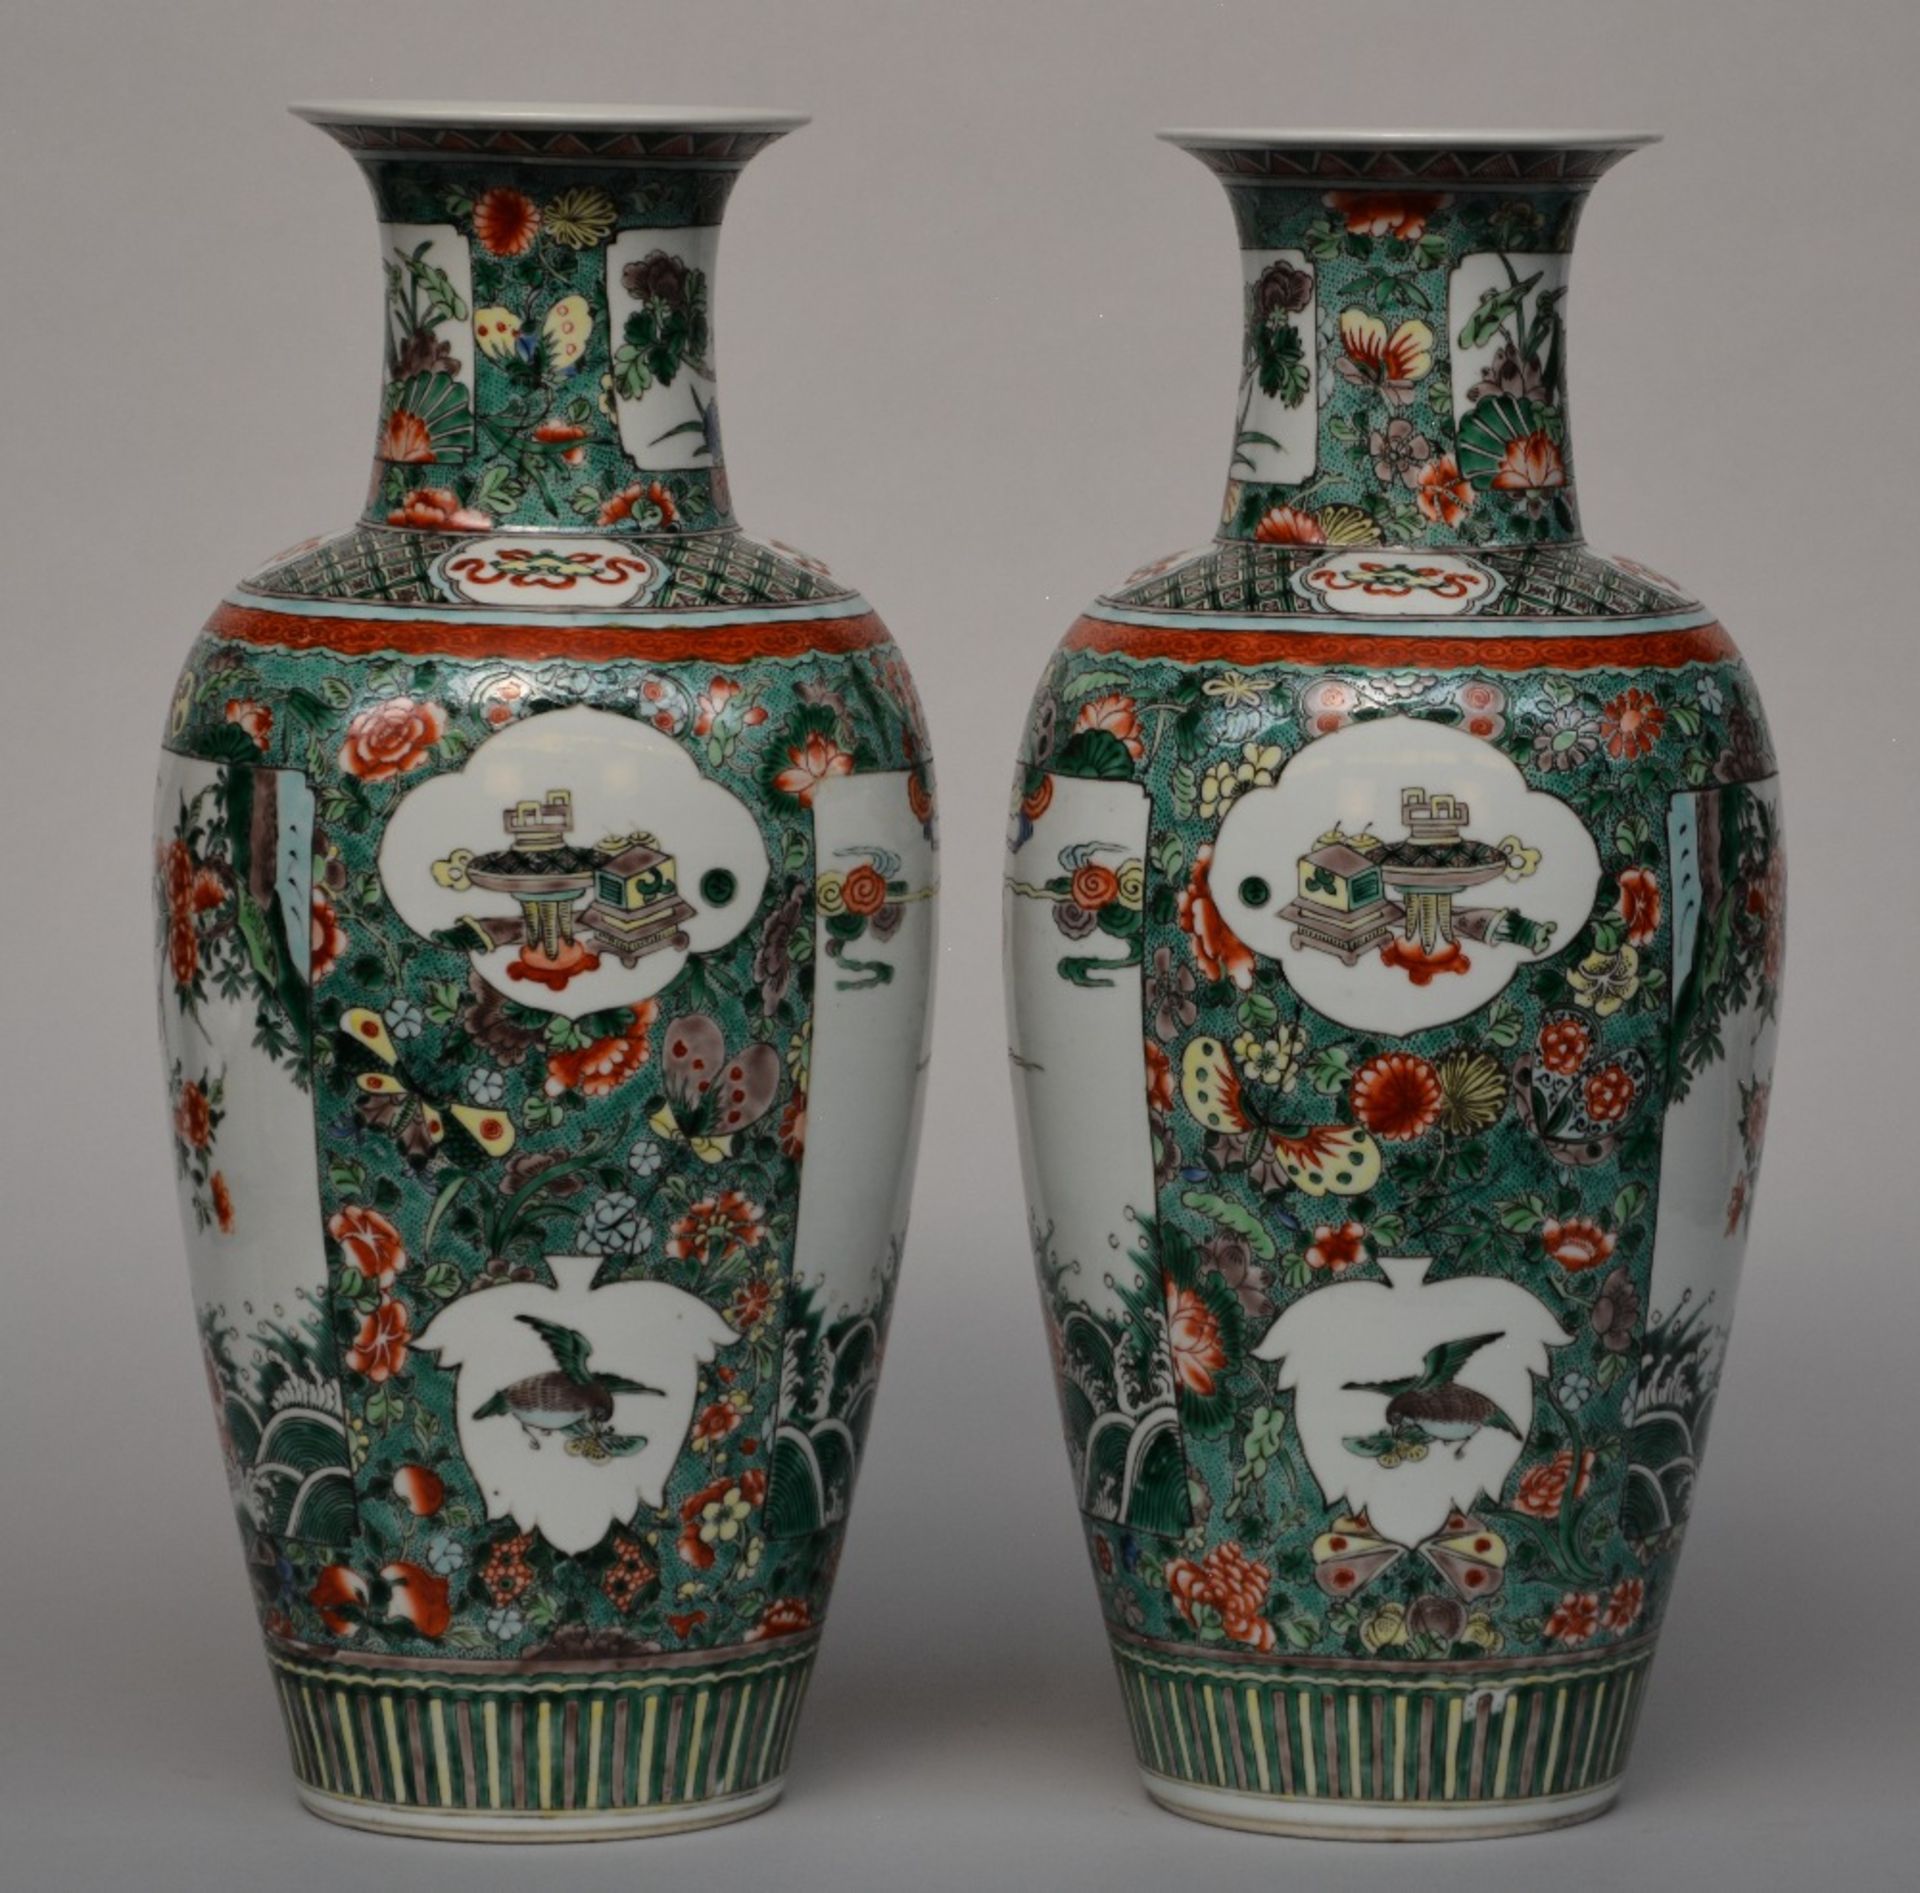 A pair of Chinese famille verte vases decorated with floral motifs, fish and a dragon, H 45 - 45,5 - Image 2 of 6